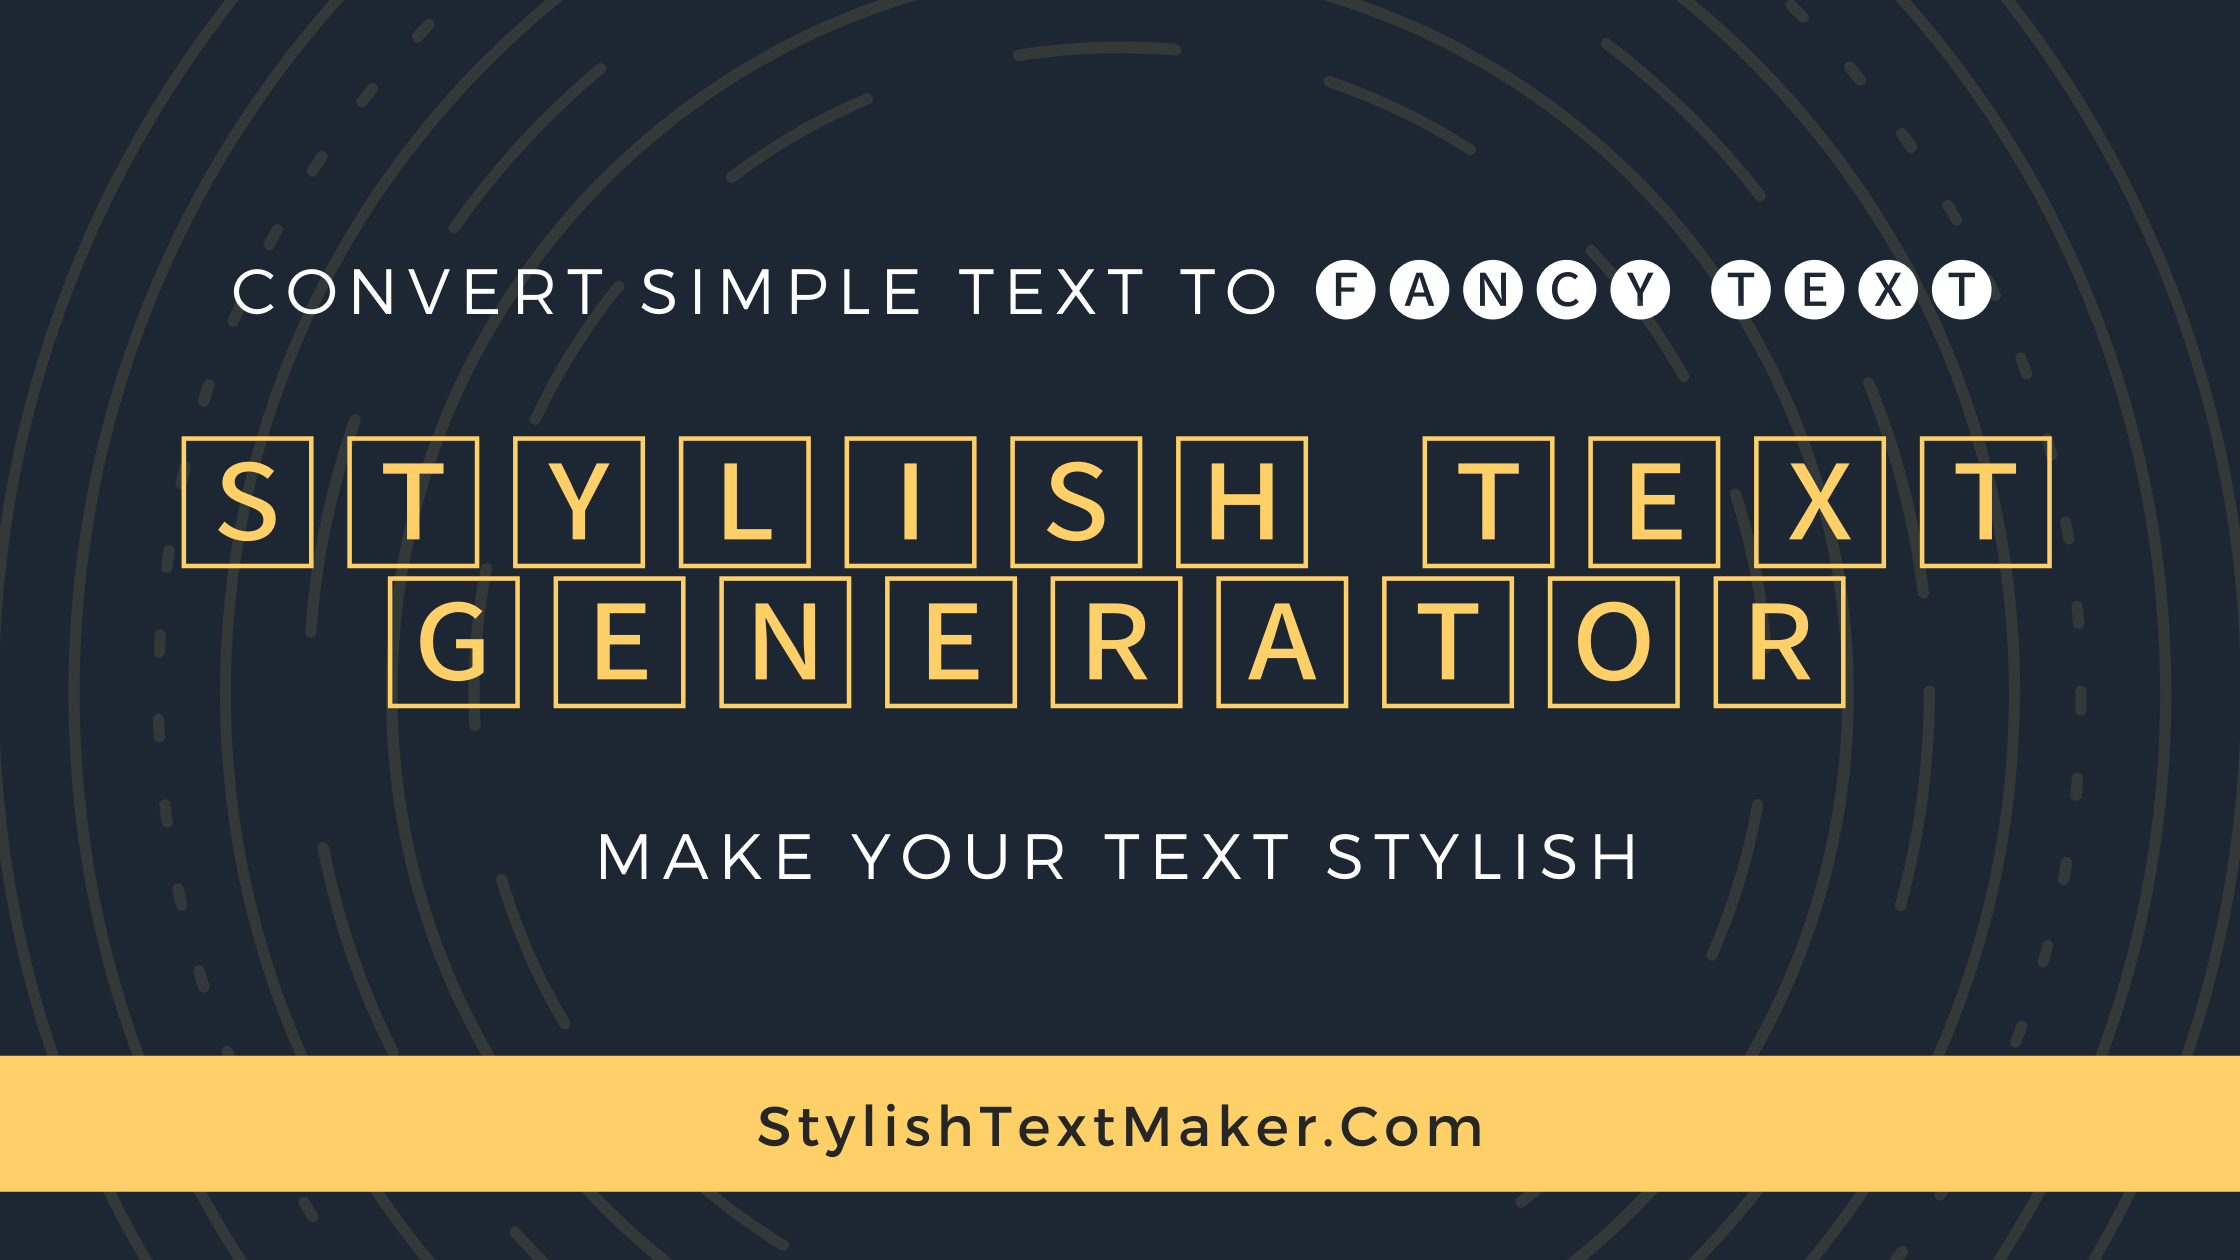 Try disloyalty Horn Stylish Text Generator - ℂ𝕠𝕠𝕝 & 𝓕𝓪𝓷𝓬𝔂 Text Fonts